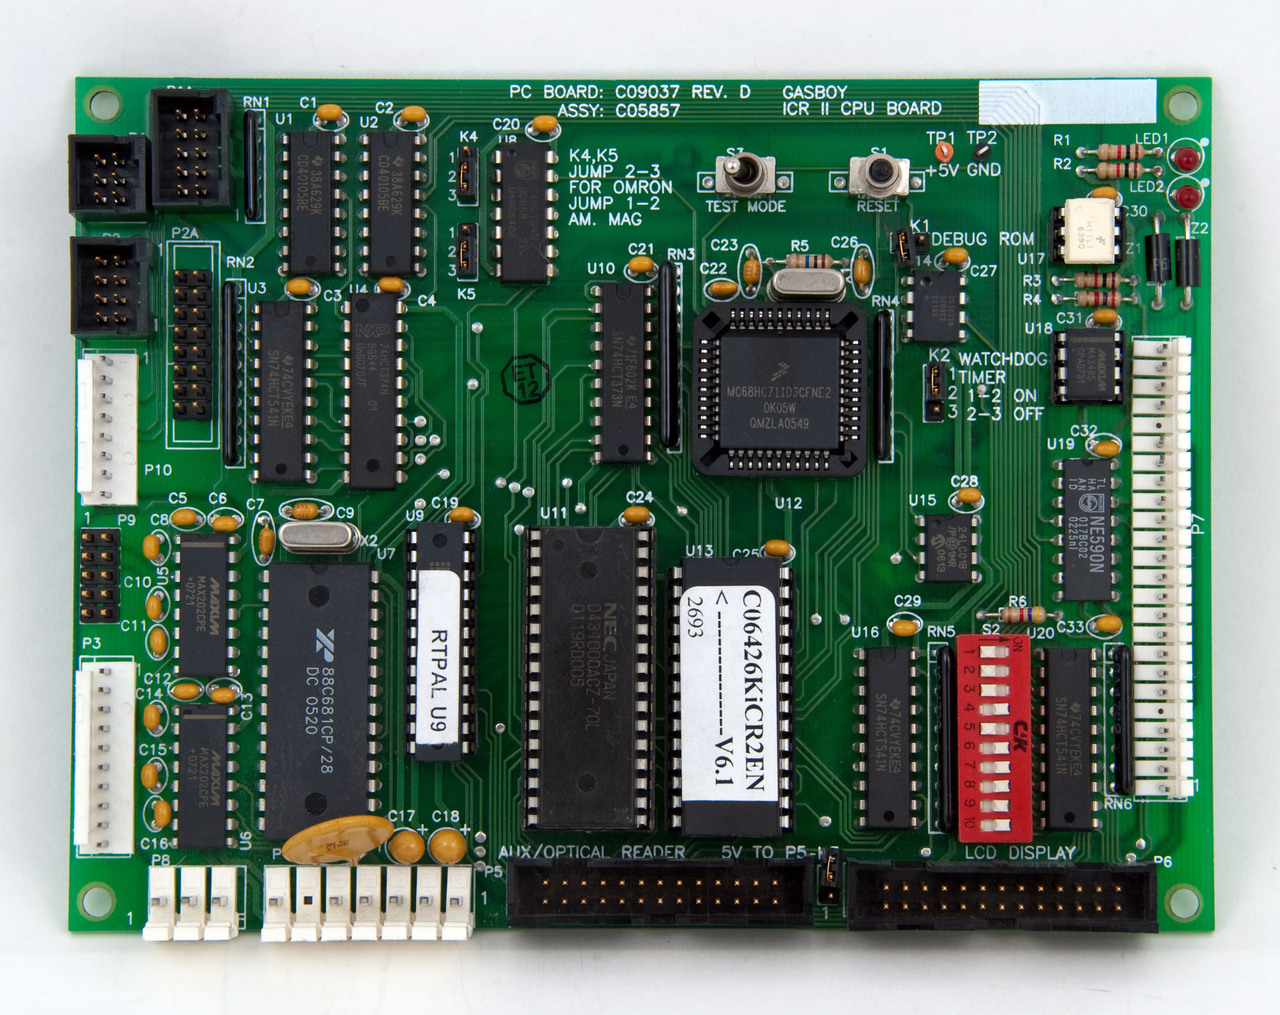 NEW STYLE ICR2 CPU BOARD, Fits Gilbarco Image